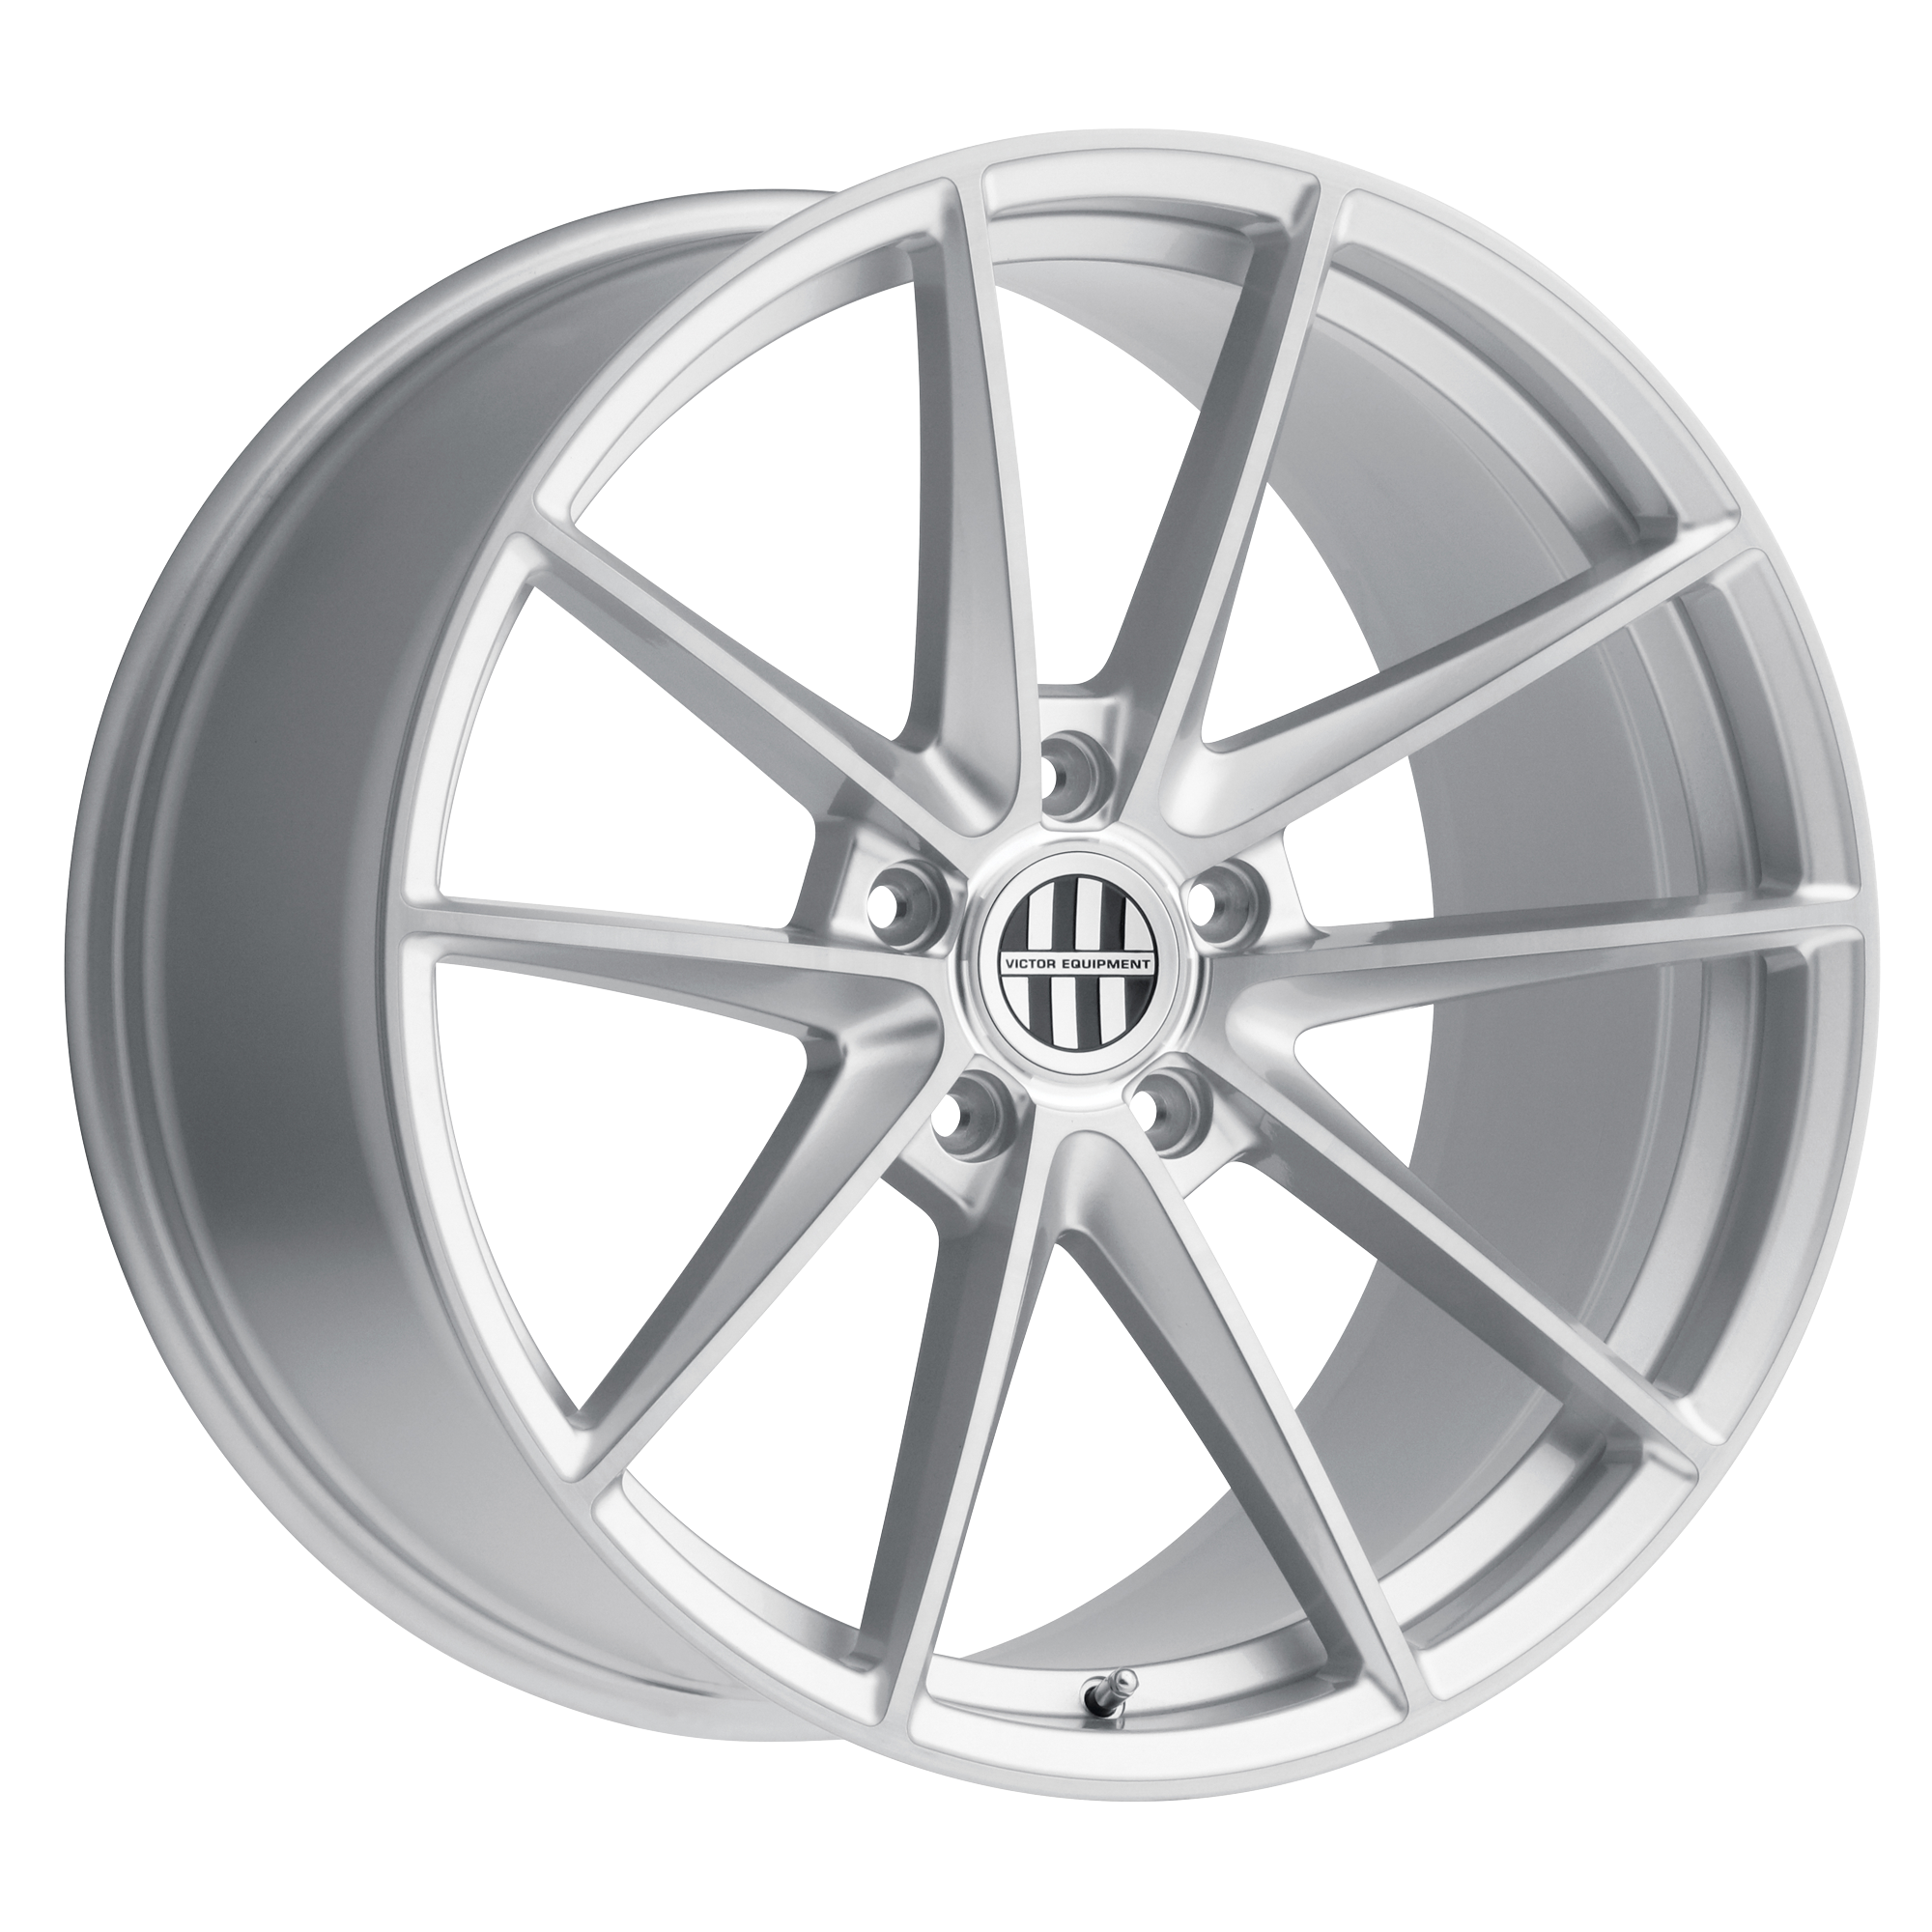 VICTOR EQUIPMENT ZUFFEN SILVER W/ BRUSHED FACE WHEELS | 19X8.5 | 5X130 | OFFSET: 45MM | CB: 71.5MM